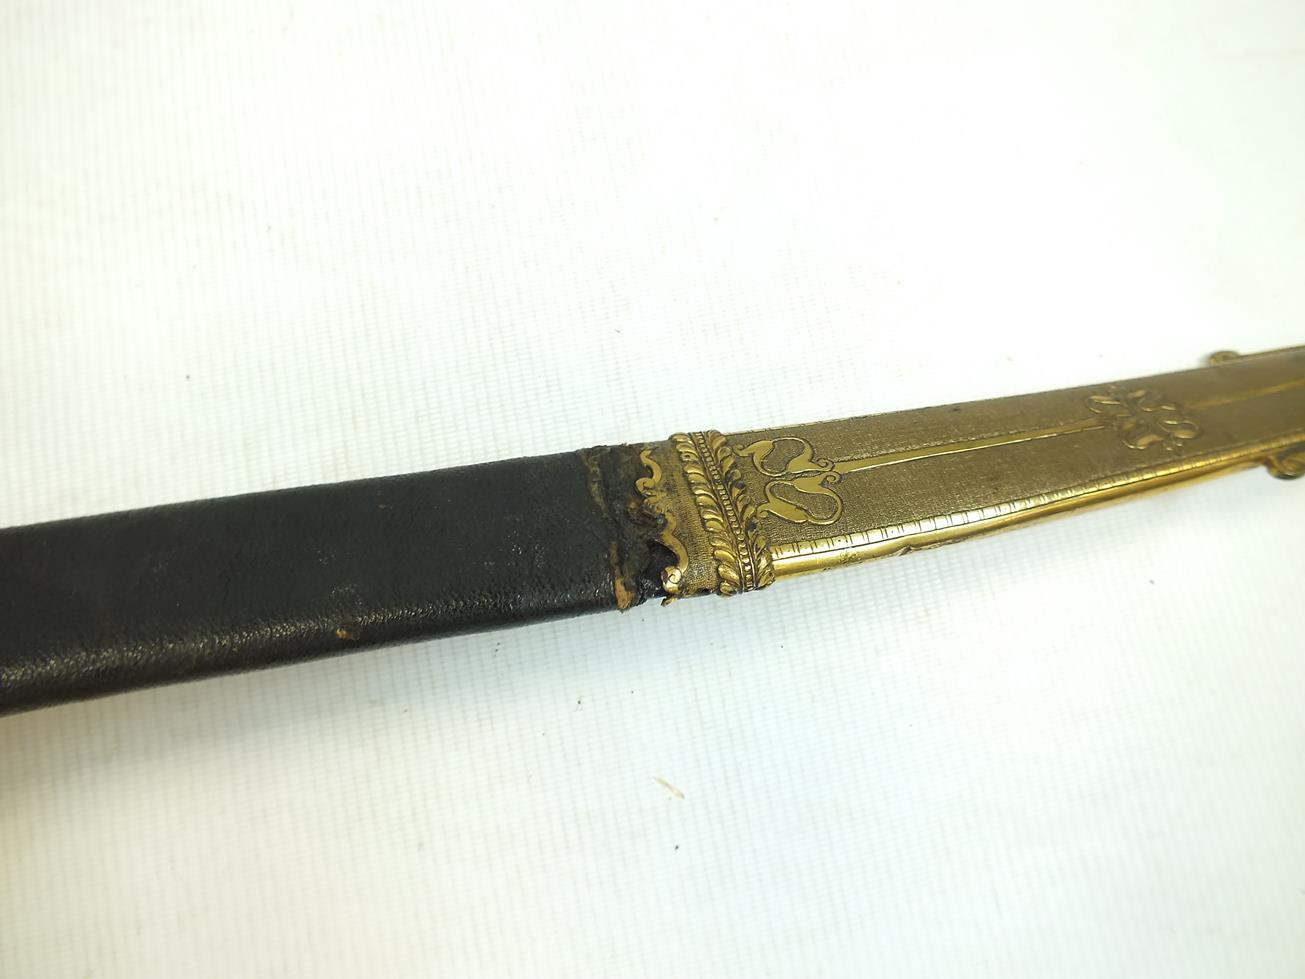 AN HIGHLY UNUSUAL PRESENTATION QUALITY MAMELUKE HILTED DIRK MOUNTED WITH A YATAGHAN BLADE BY SALTER, - Image 21 of 26